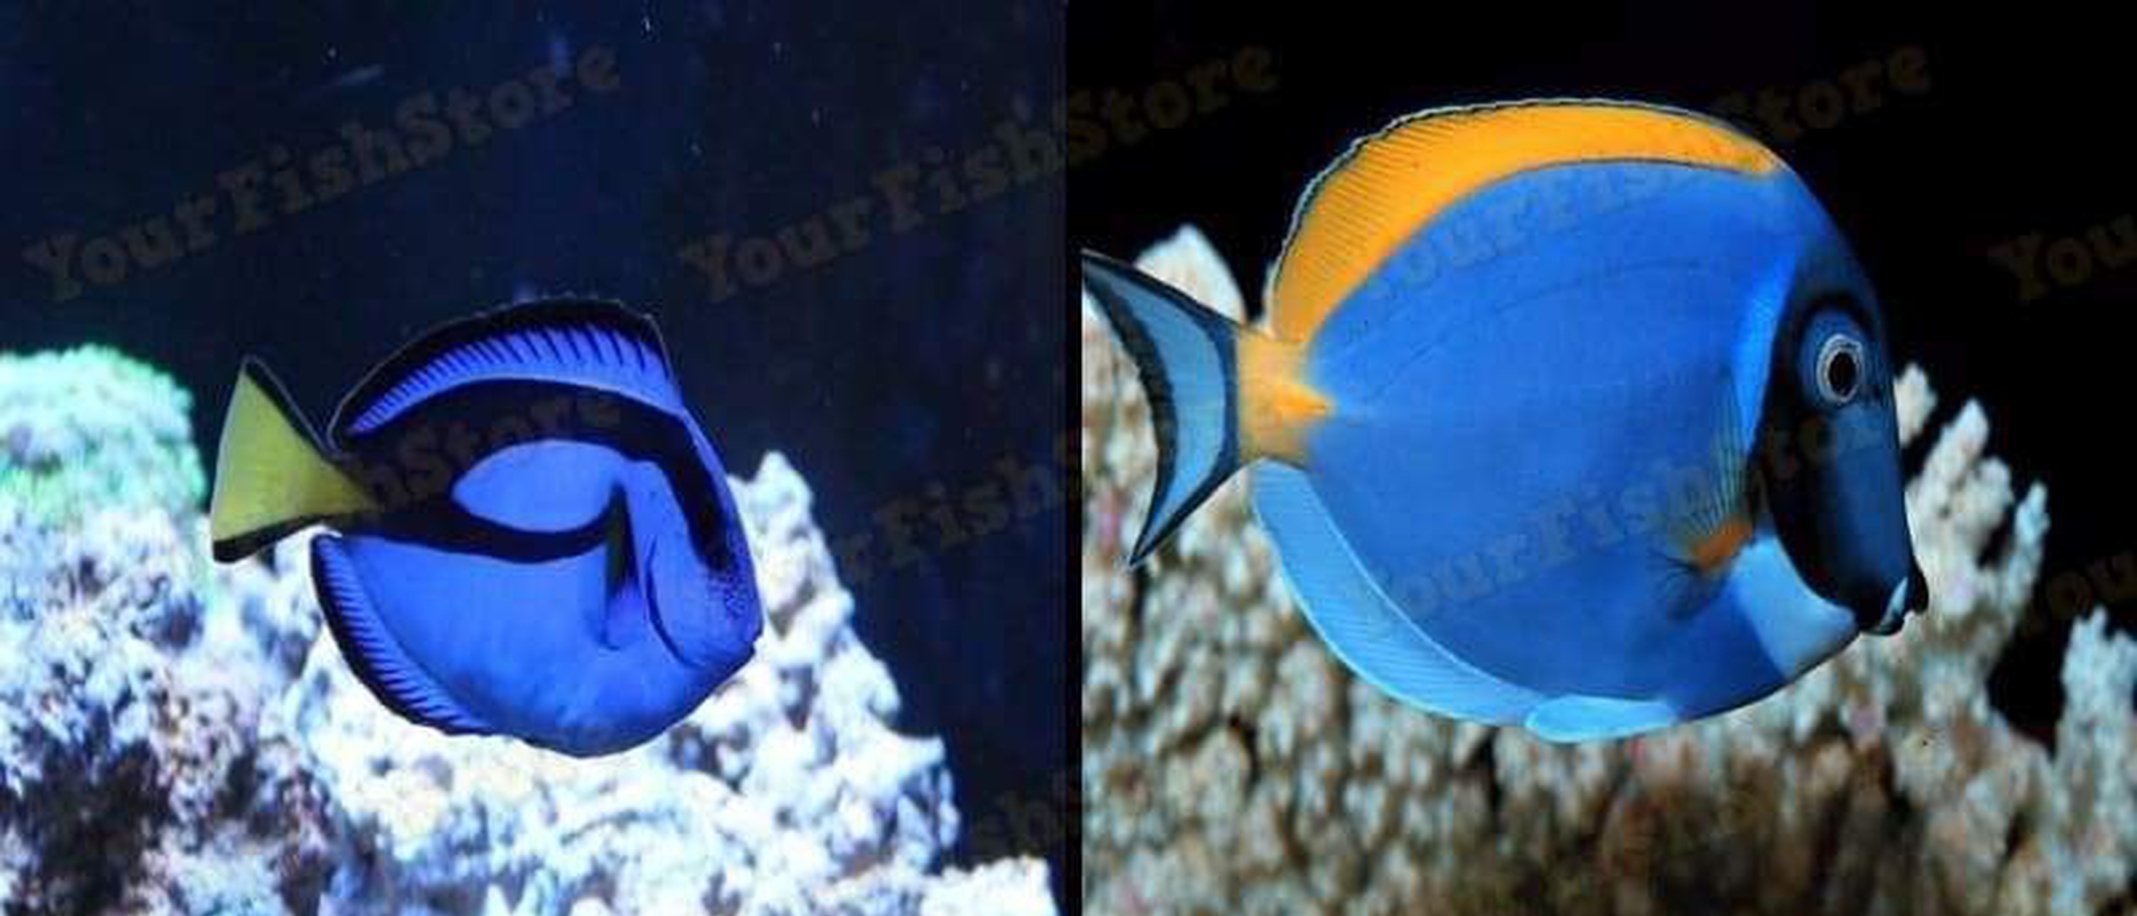 X1 Blue Hippo Tang Sml 1"- 2" - X1 Powder Blue Tang Sml/Med Fish-marine fish packages-www.YourFishStore.com